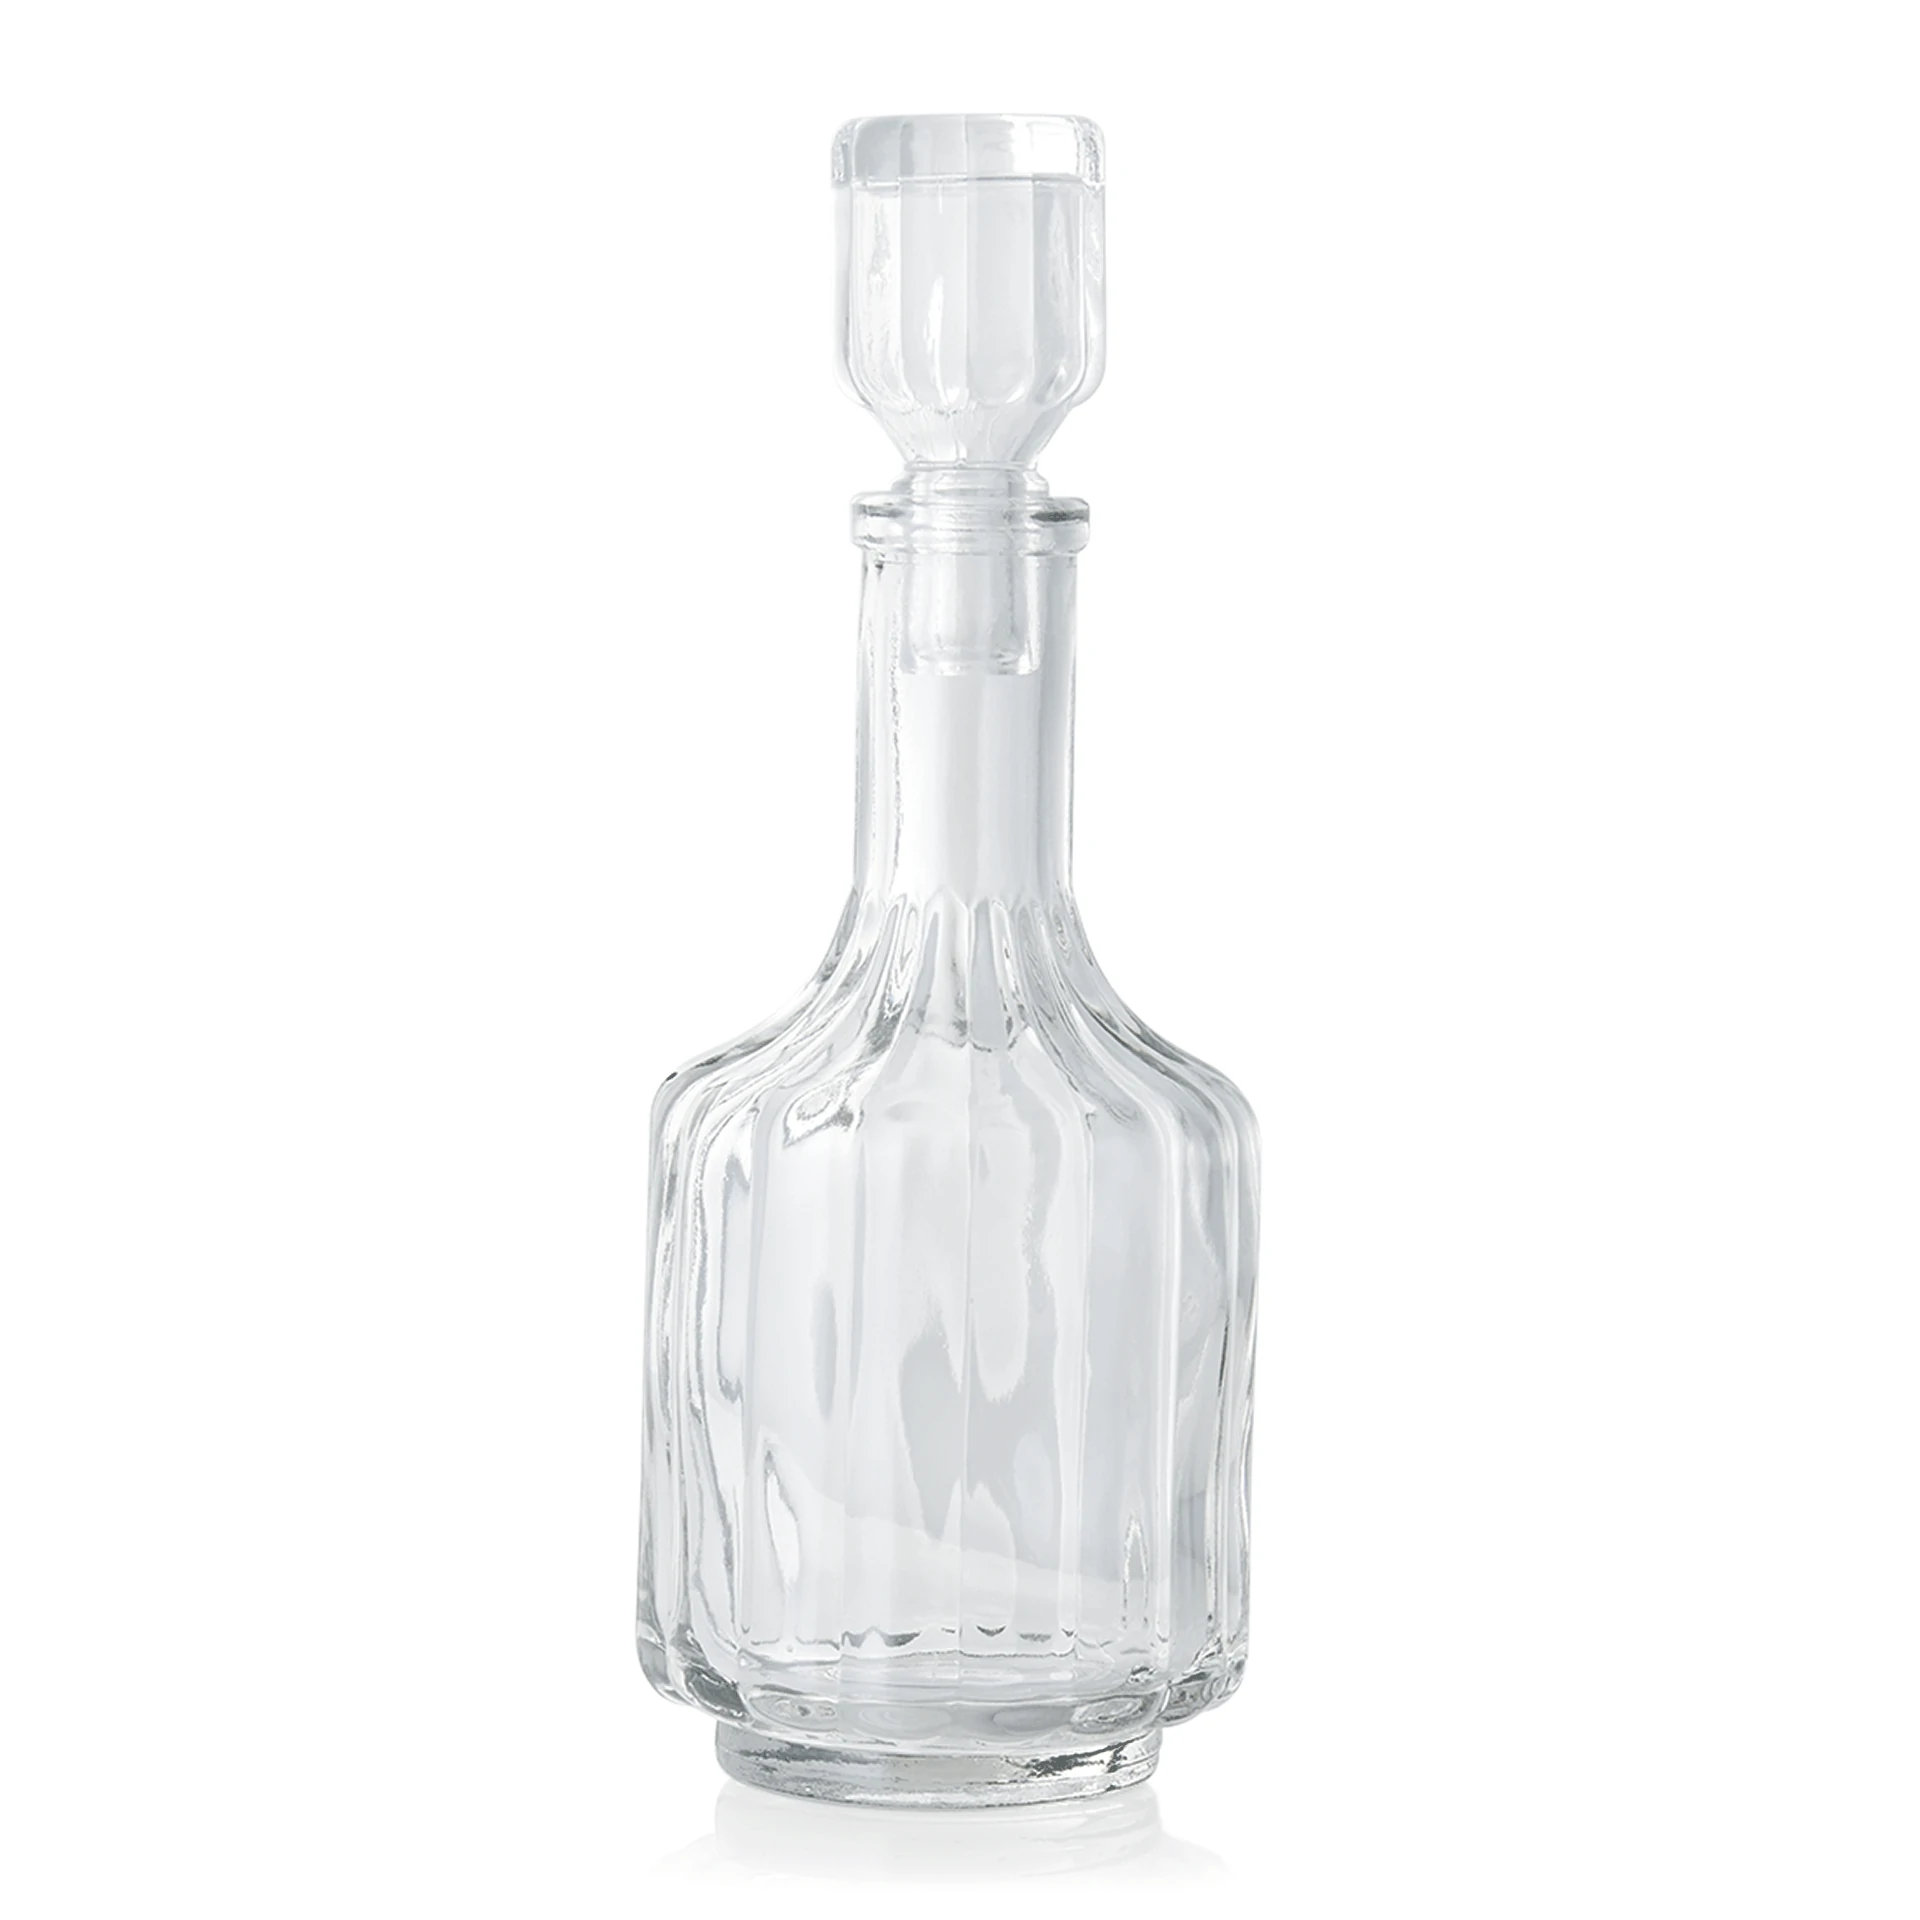 Replacement vinegar and oil bottle with stopper for cruet set